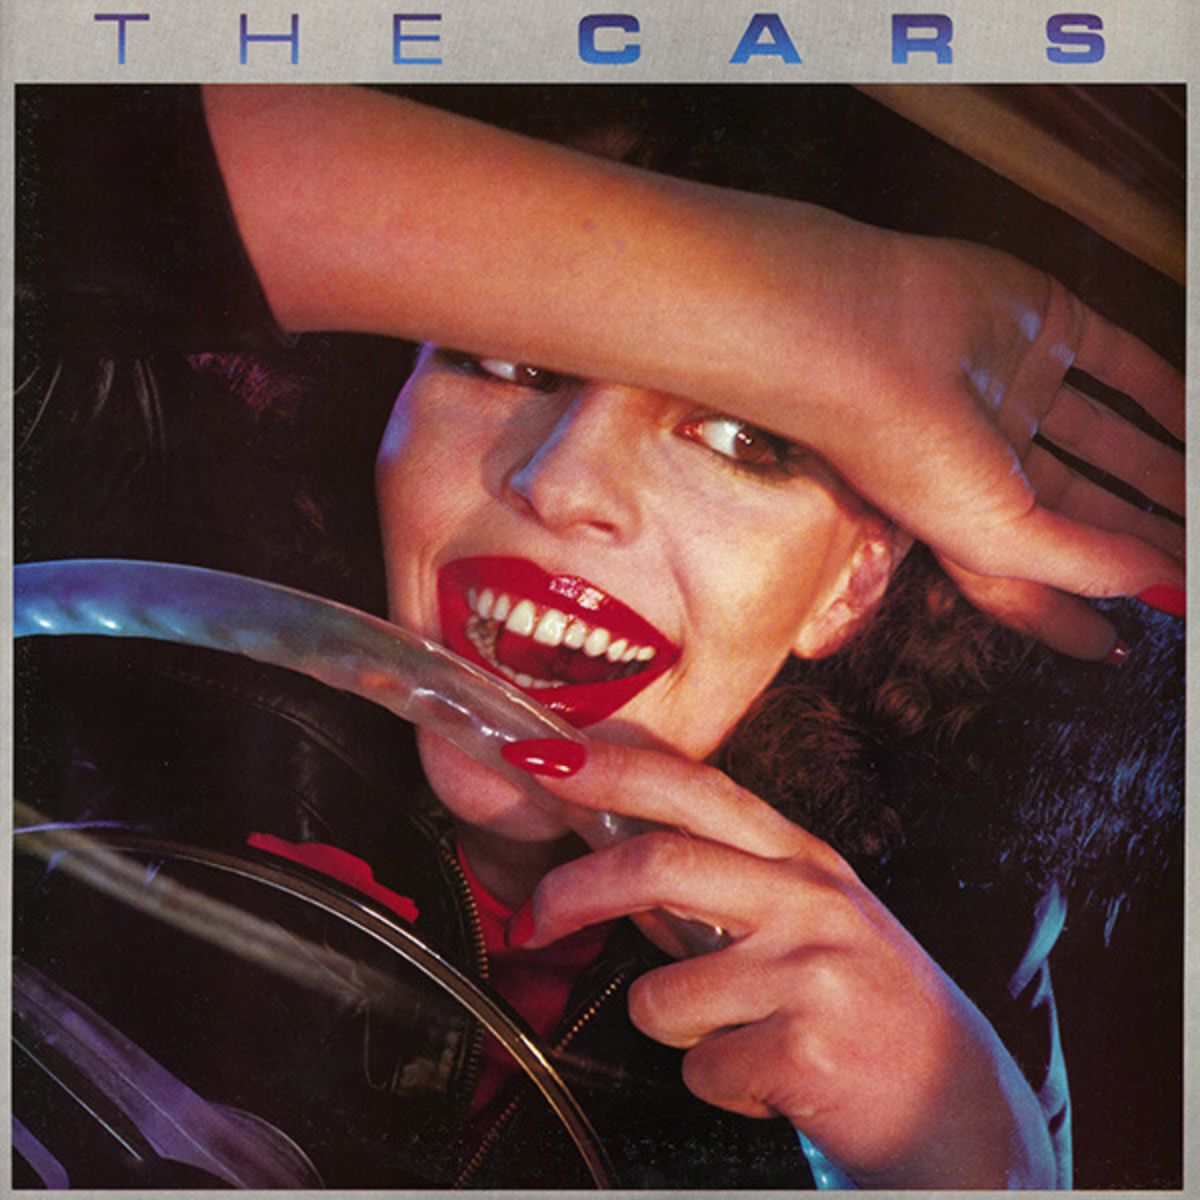 The eponymous debut album by the band the cars